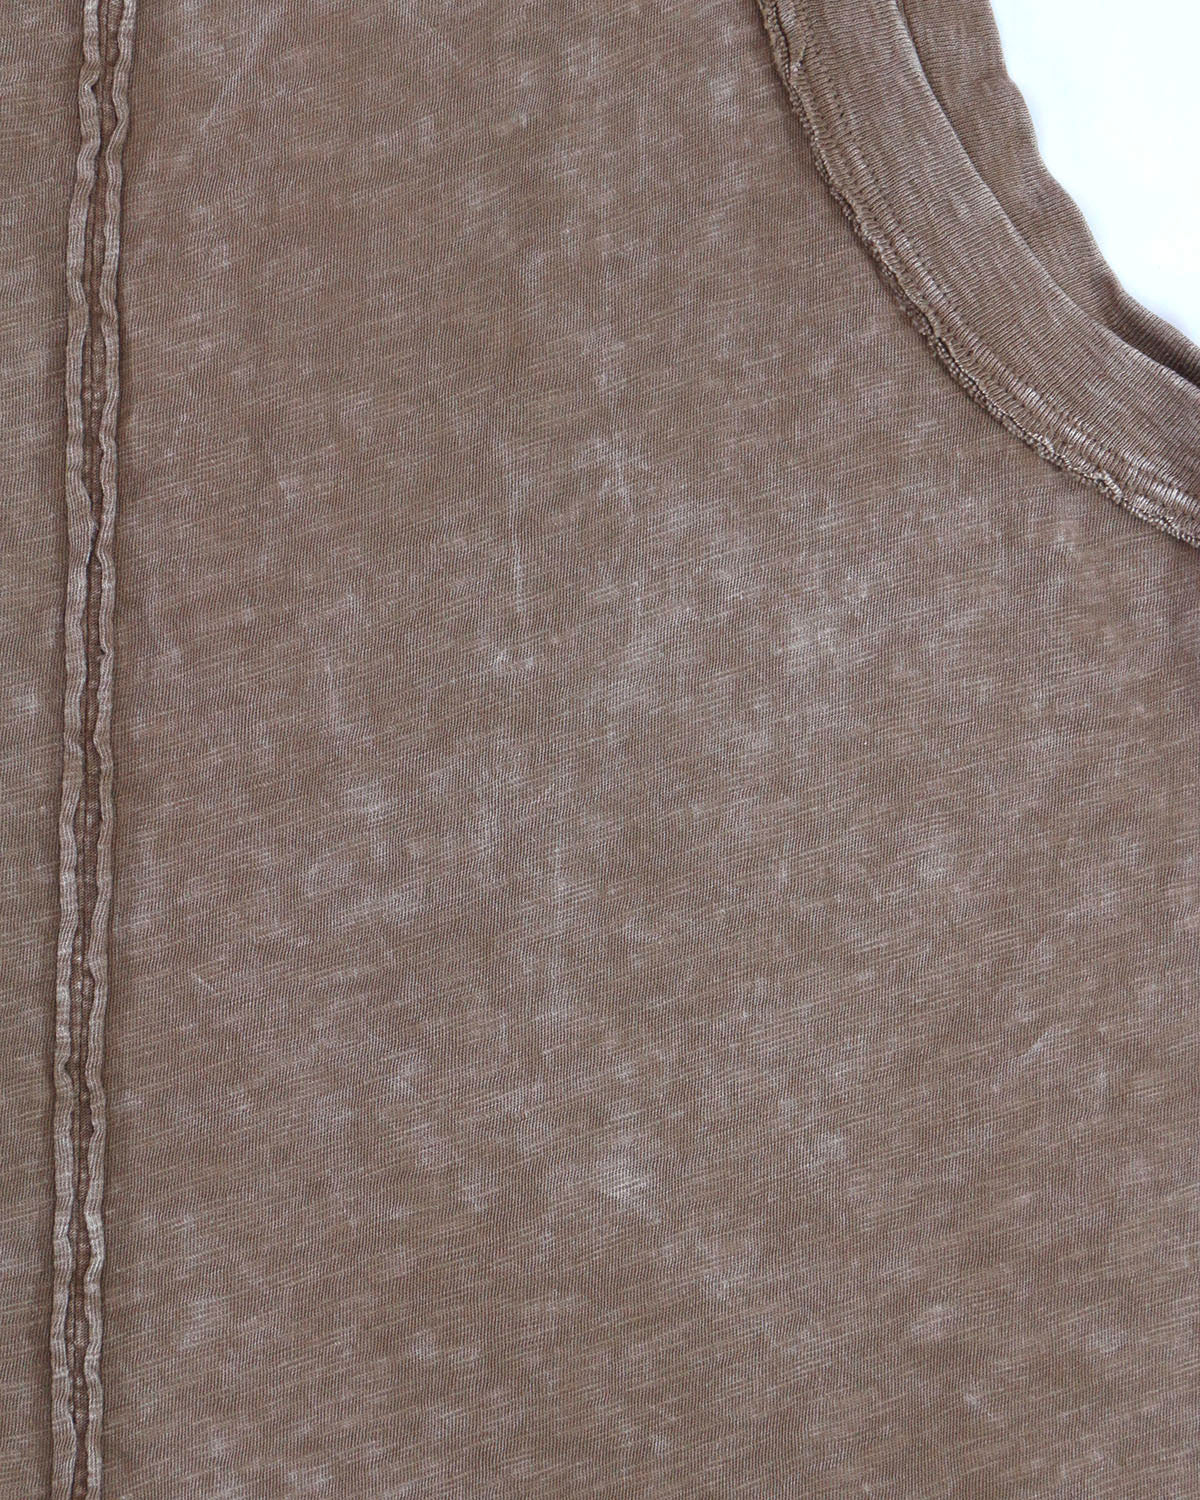 close up view of mineral washed fabric and distressed seams womens knit tank